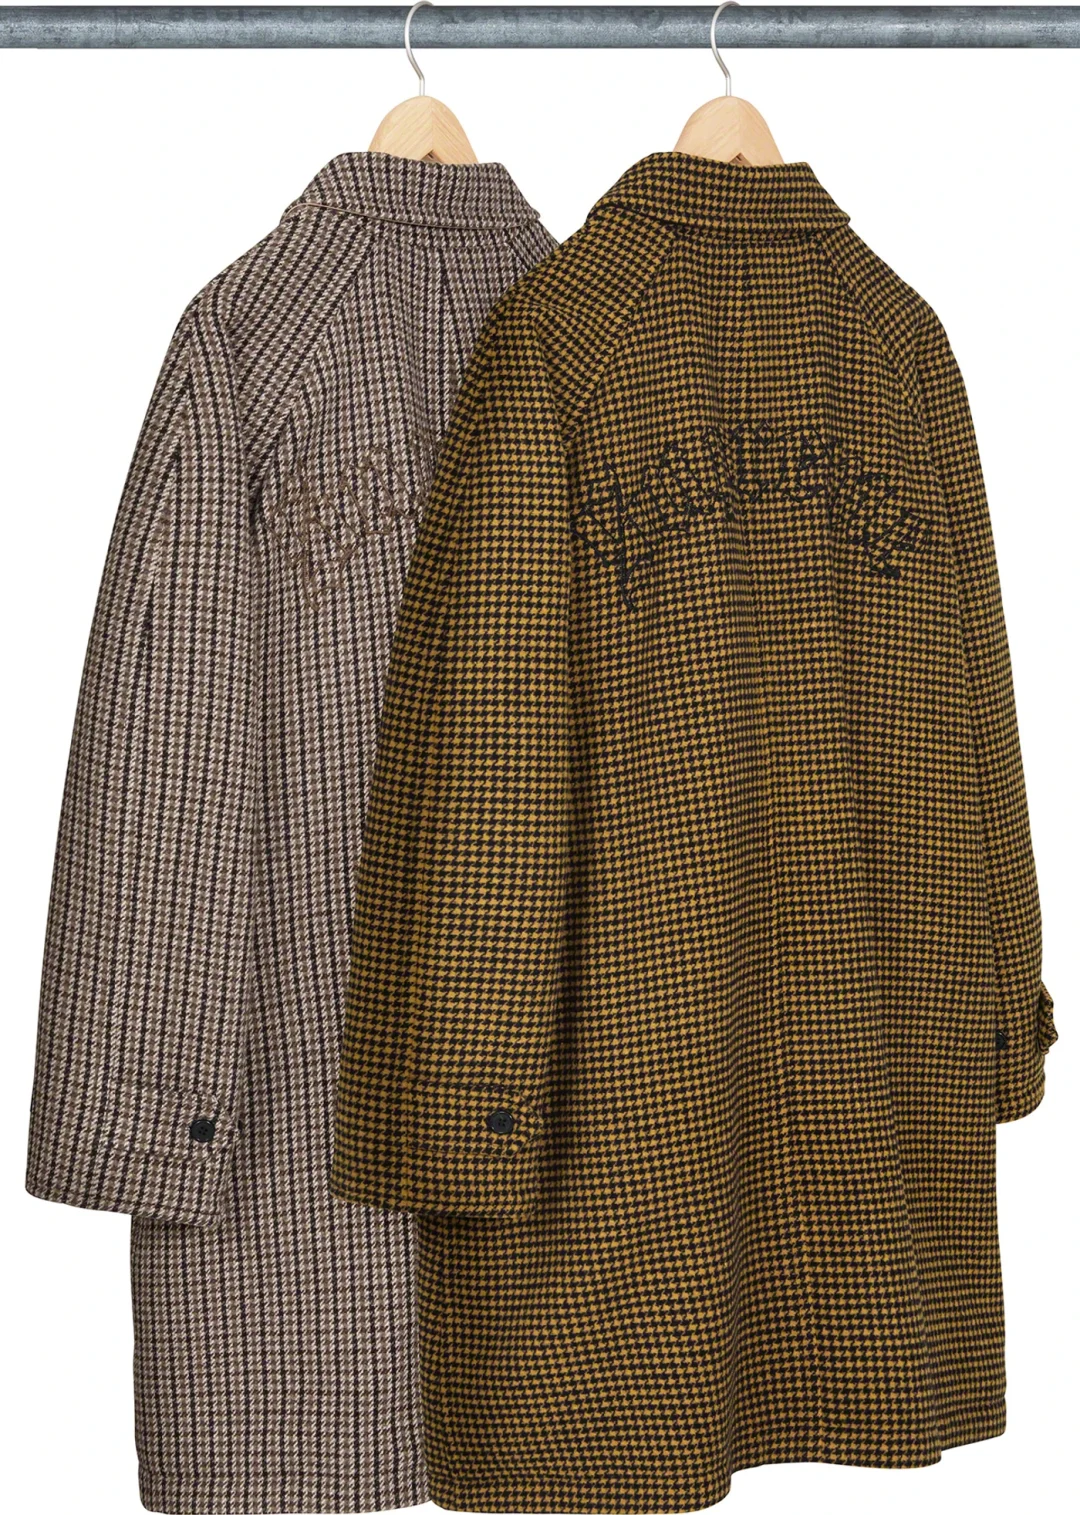 supreme-23fw-23aw-reversible-houndstooth-overcoat